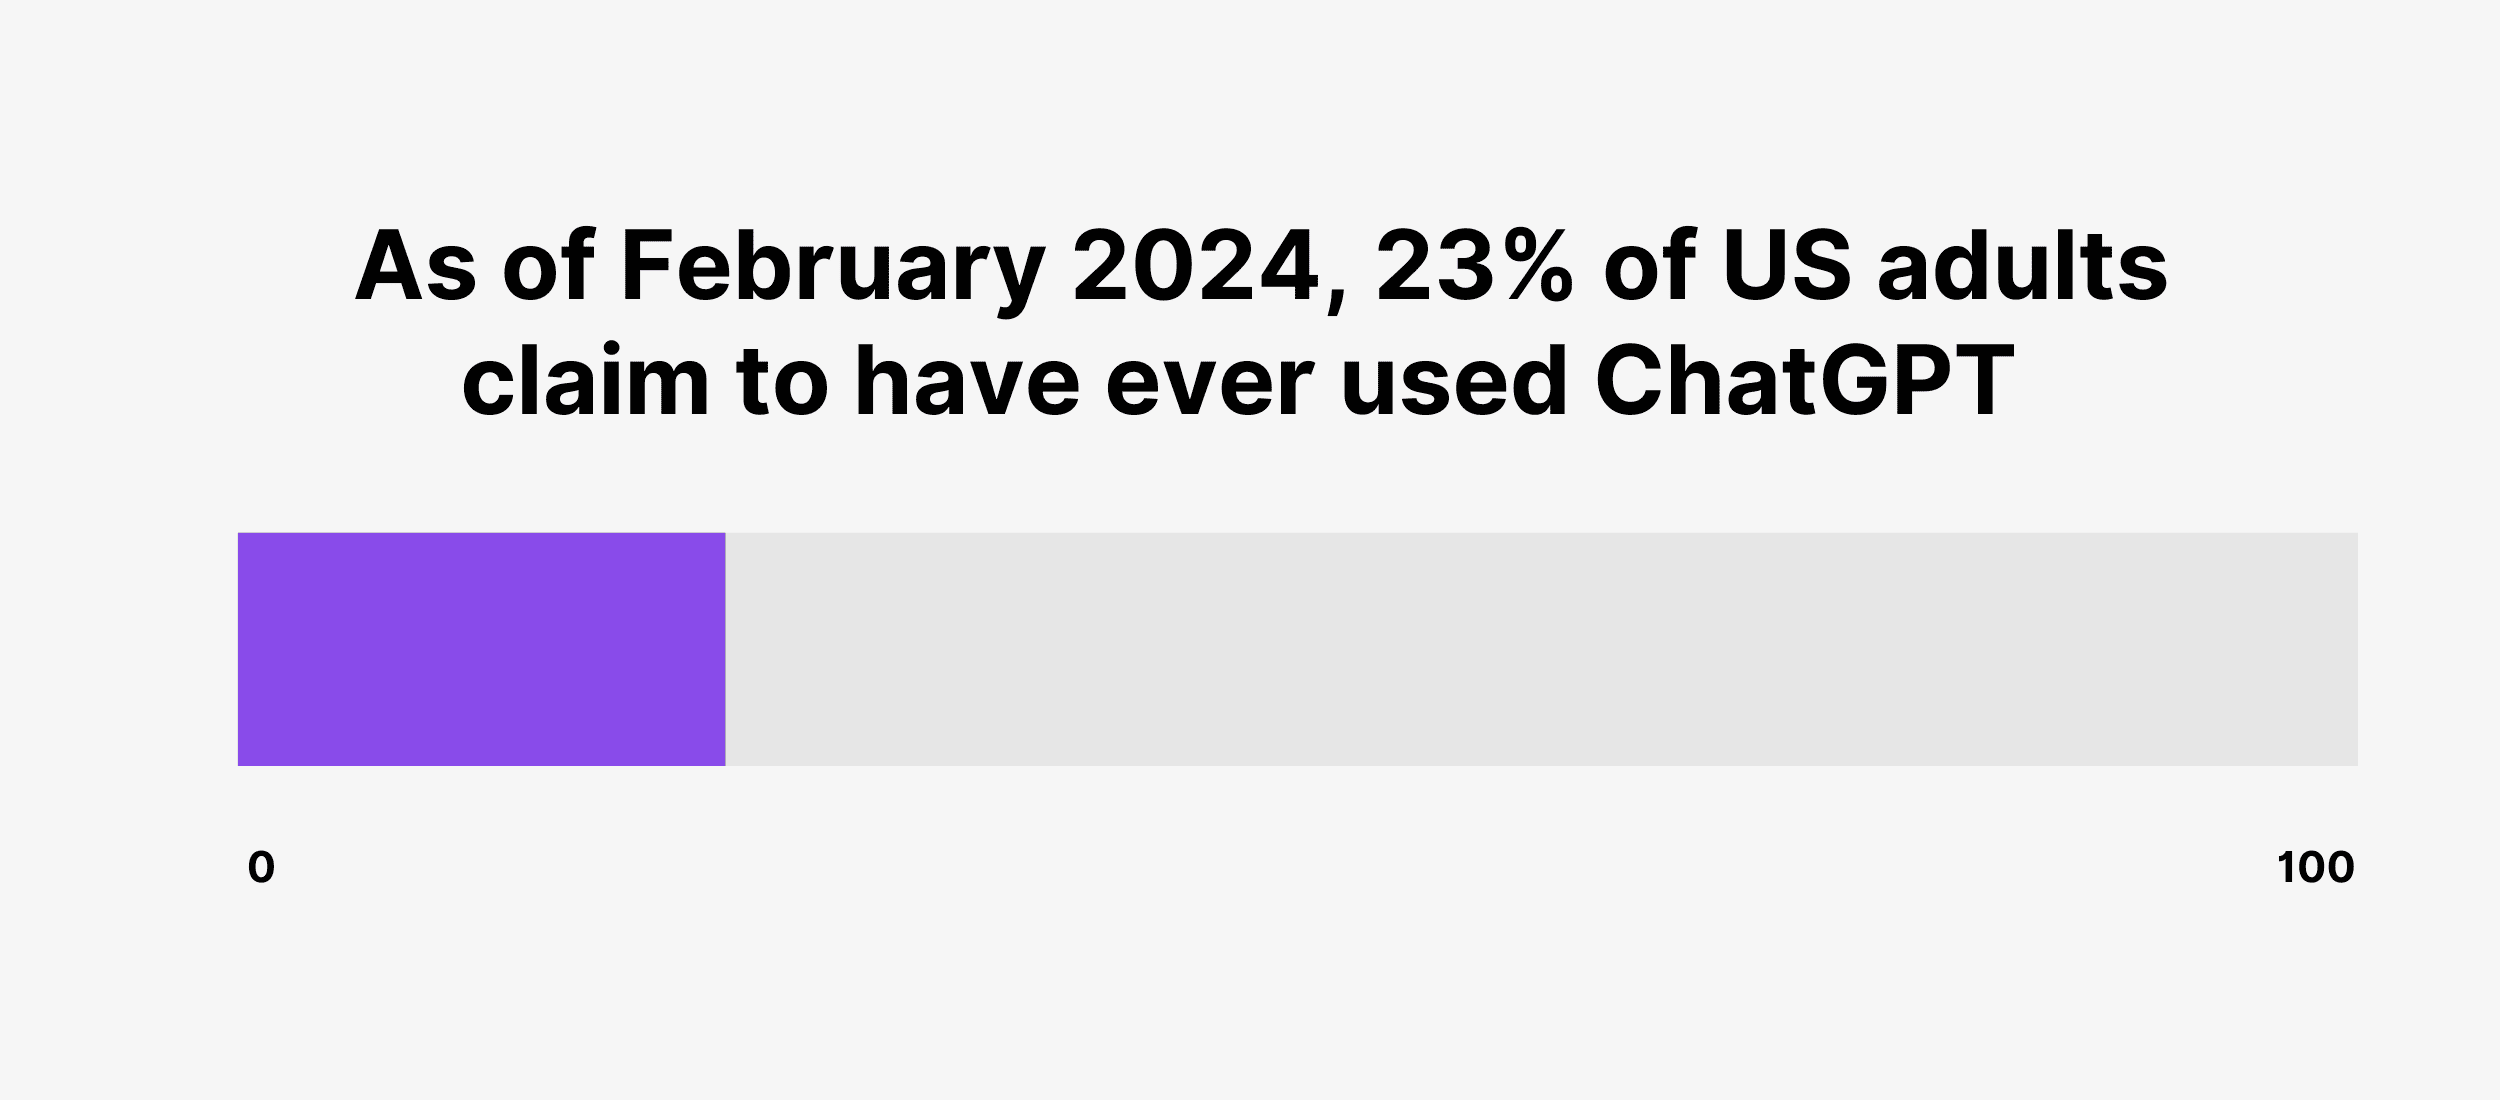 As of February 2024, 23% of US adults claim to have ever used ChatGPT